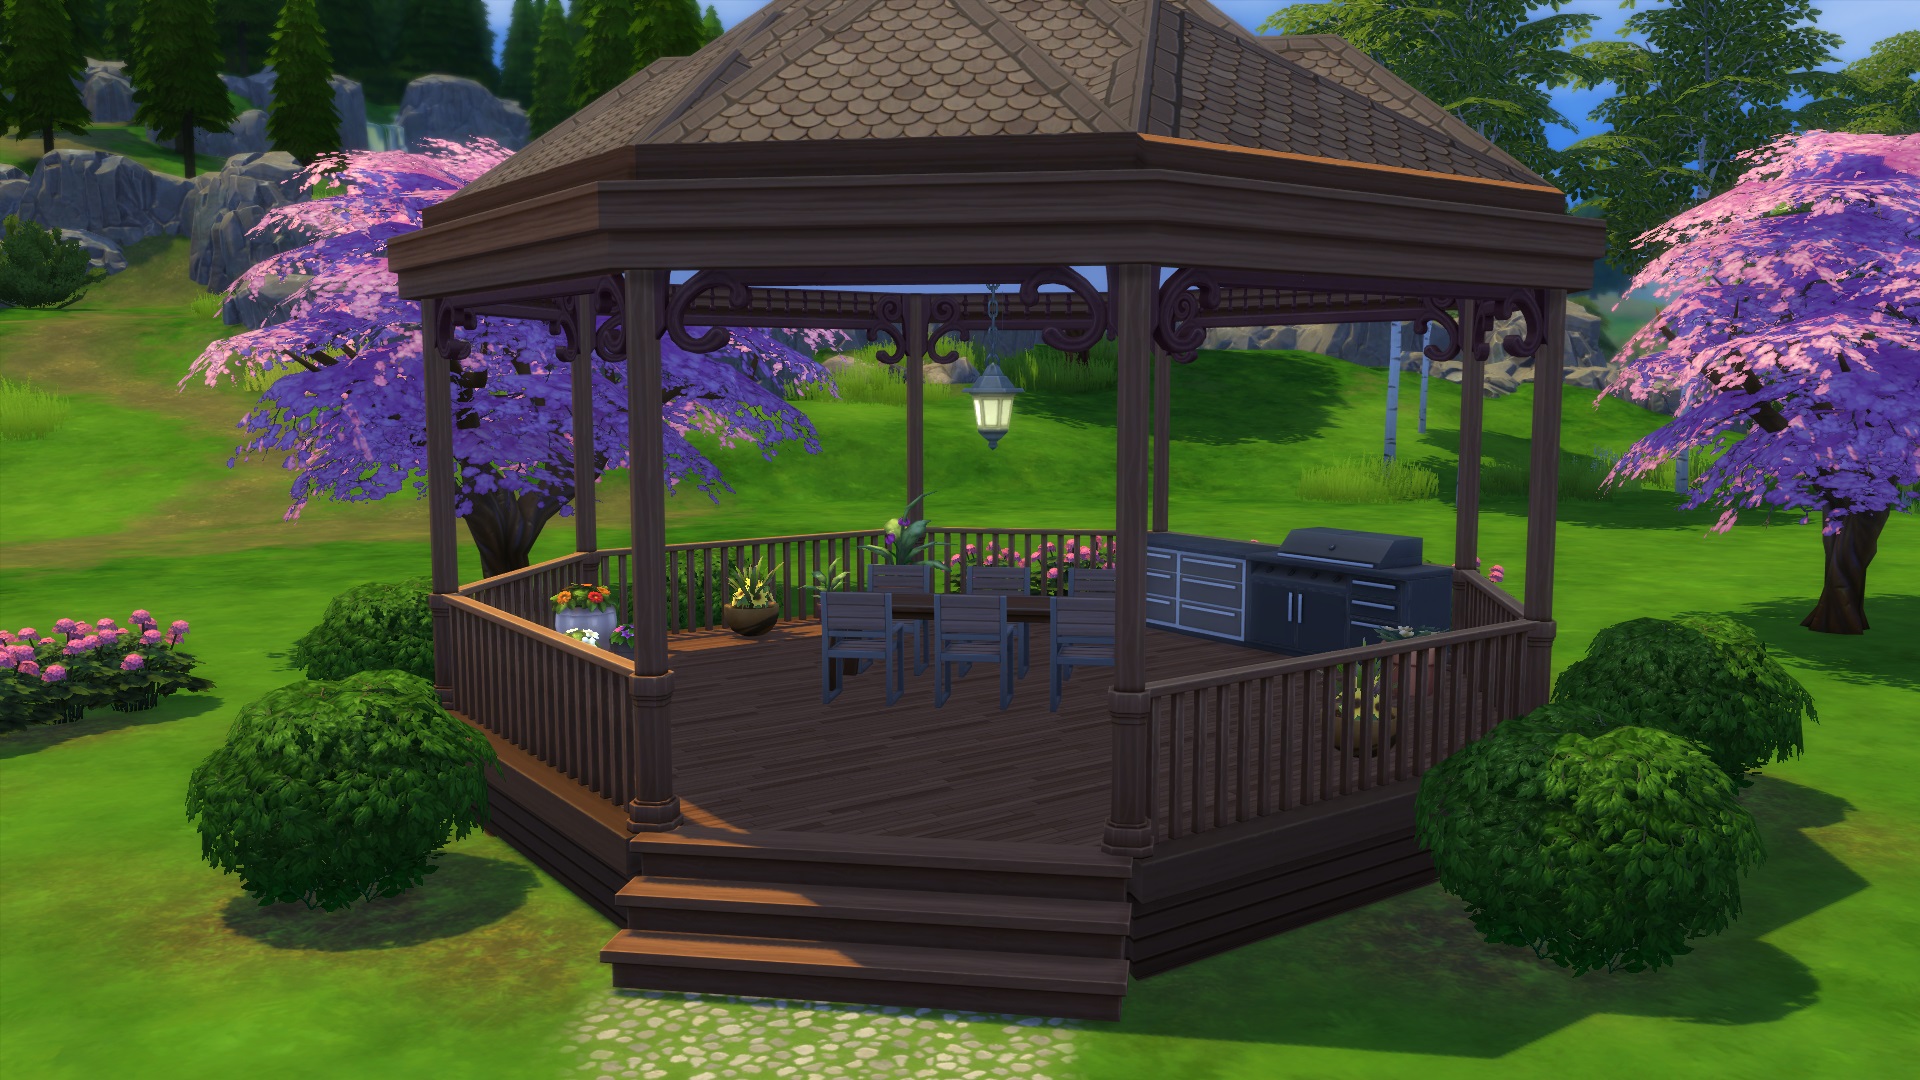 Tutorial: How to Build a Gazebo in The Sims 4 | SimsVIP